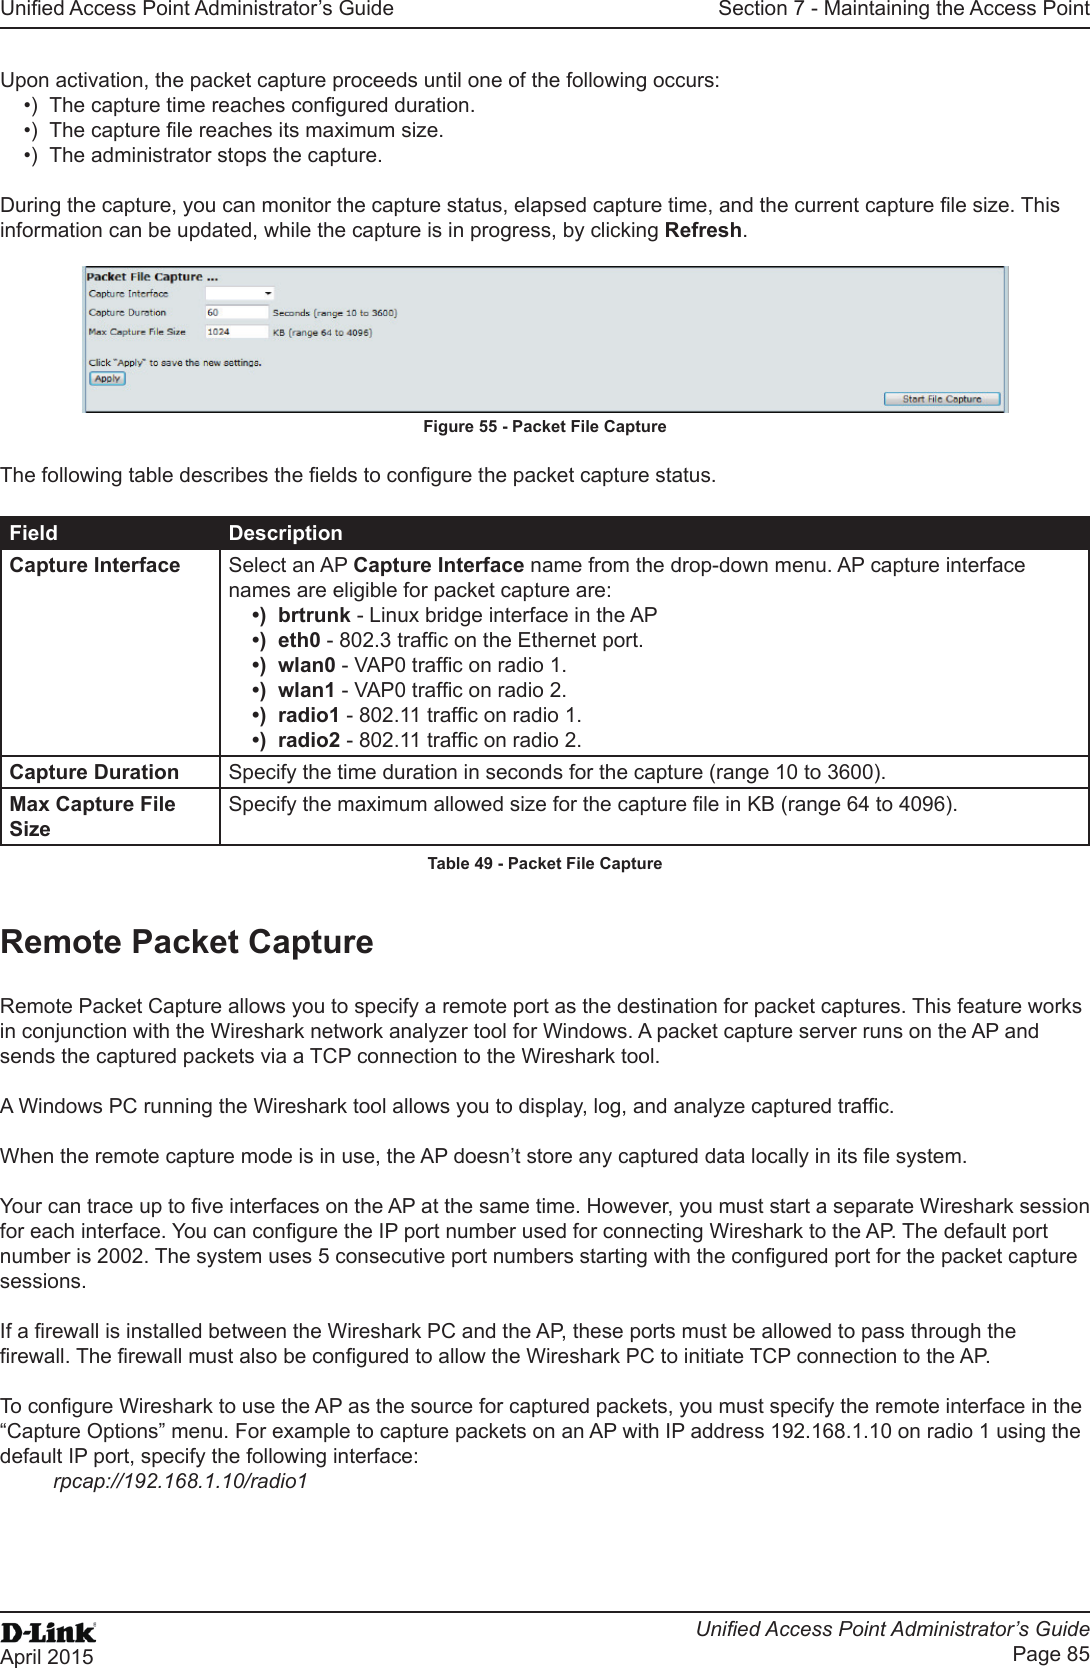 Unied Access Point Administrator’s GuideUnied Access Point Administrator’s GuidePage 85April 2015Section 7 - Maintaining the Access PointUpon activation, the packet capture proceeds until one of the following occurs:•)  The capture time reaches congured duration.•)  The capture le reaches its maximum size.•)  The administrator stops the capture.During the capture, you can monitor the capture status, elapsed capture time, and the current capture le size. This information can be updated, while the capture is in progress, by clicking Refresh.Figure 55 - Packet File CaptureThe following table describes the elds to congure the packet capture status.Field DescriptionCapture Interface Select an AP Capture Interface name from the drop-down menu. AP capture interface names are eligible for packet capture are:•)  brtrunk - Linux bridge interface in the AP•)  eth0 - 802.3 trafc on the Ethernet port.•)  wlan0 - VAP0 trafc on radio 1.•)  wlan1 - VAP0 trafc on radio 2.•)  radio1 - 802.11 trafc on radio 1.•)  radio2 - 802.11 trafc on radio 2.Capture Duration Specify the time duration in seconds for the capture (range 10 to 3600).Max Capture File SizeSpecify the maximum allowed size for the capture le in KB (range 64 to 4096).Table 49 - Packet File CaptureRemote Packet CaptureRemote Packet Capture allows you to specify a remote port as the destination for packet captures. This feature works in conjunction with the Wireshark network analyzer tool for Windows. A packet capture server runs on the AP and sends the captured packets via a TCP connection to the Wireshark tool.A Windows PC running the Wireshark tool allows you to display, log, and analyze captured trafc. When the remote capture mode is in use, the AP doesn’t store any captured data locally in its le system.Your can trace up to ve interfaces on the AP at the same time. However, you must start a separate Wireshark session for each interface. You can congure the IP port number used for connecting Wireshark to the AP. The default port number is 2002. The system uses 5 consecutive port numbers starting with the congured port for the packet capture sessions.If a rewall is installed between the Wireshark PC and the AP, these ports must be allowed to pass through the rewall. The rewall must also be congured to allow the Wireshark PC to initiate TCP connection to the AP. To congure Wireshark to use the AP as the source for captured packets, you must specify the remote interface in the “Capture Options” menu. For example to capture packets on an AP with IP address 192.168.1.10 on radio 1 using the default IP port, specify the following interface: rpcap://192.168.1.10/radio1